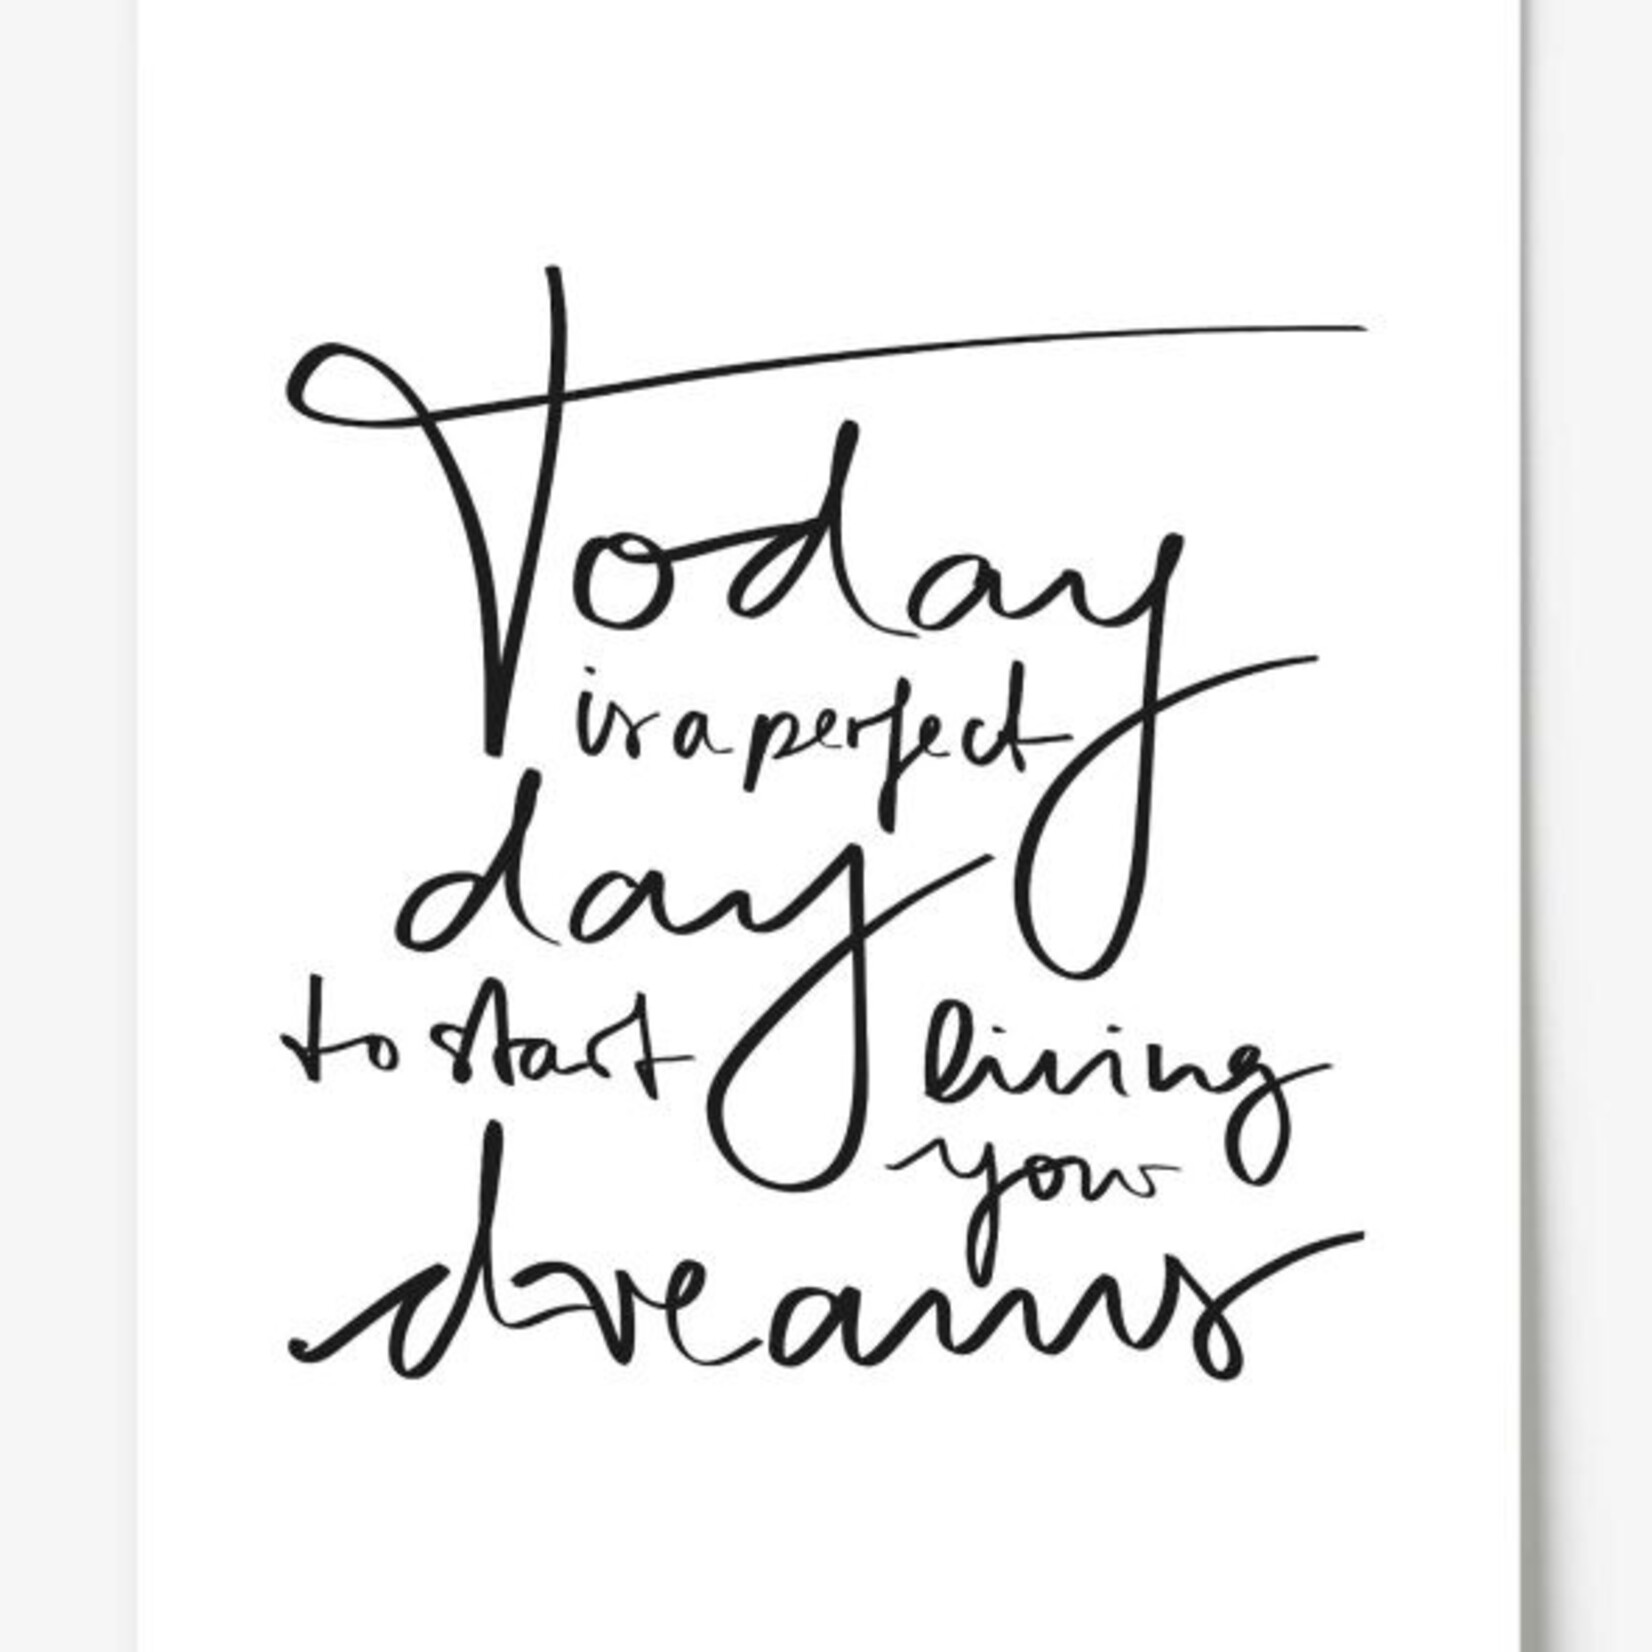 Tales by Jen Poster - Today is a perfect day to start living your dreams - A4 formaat